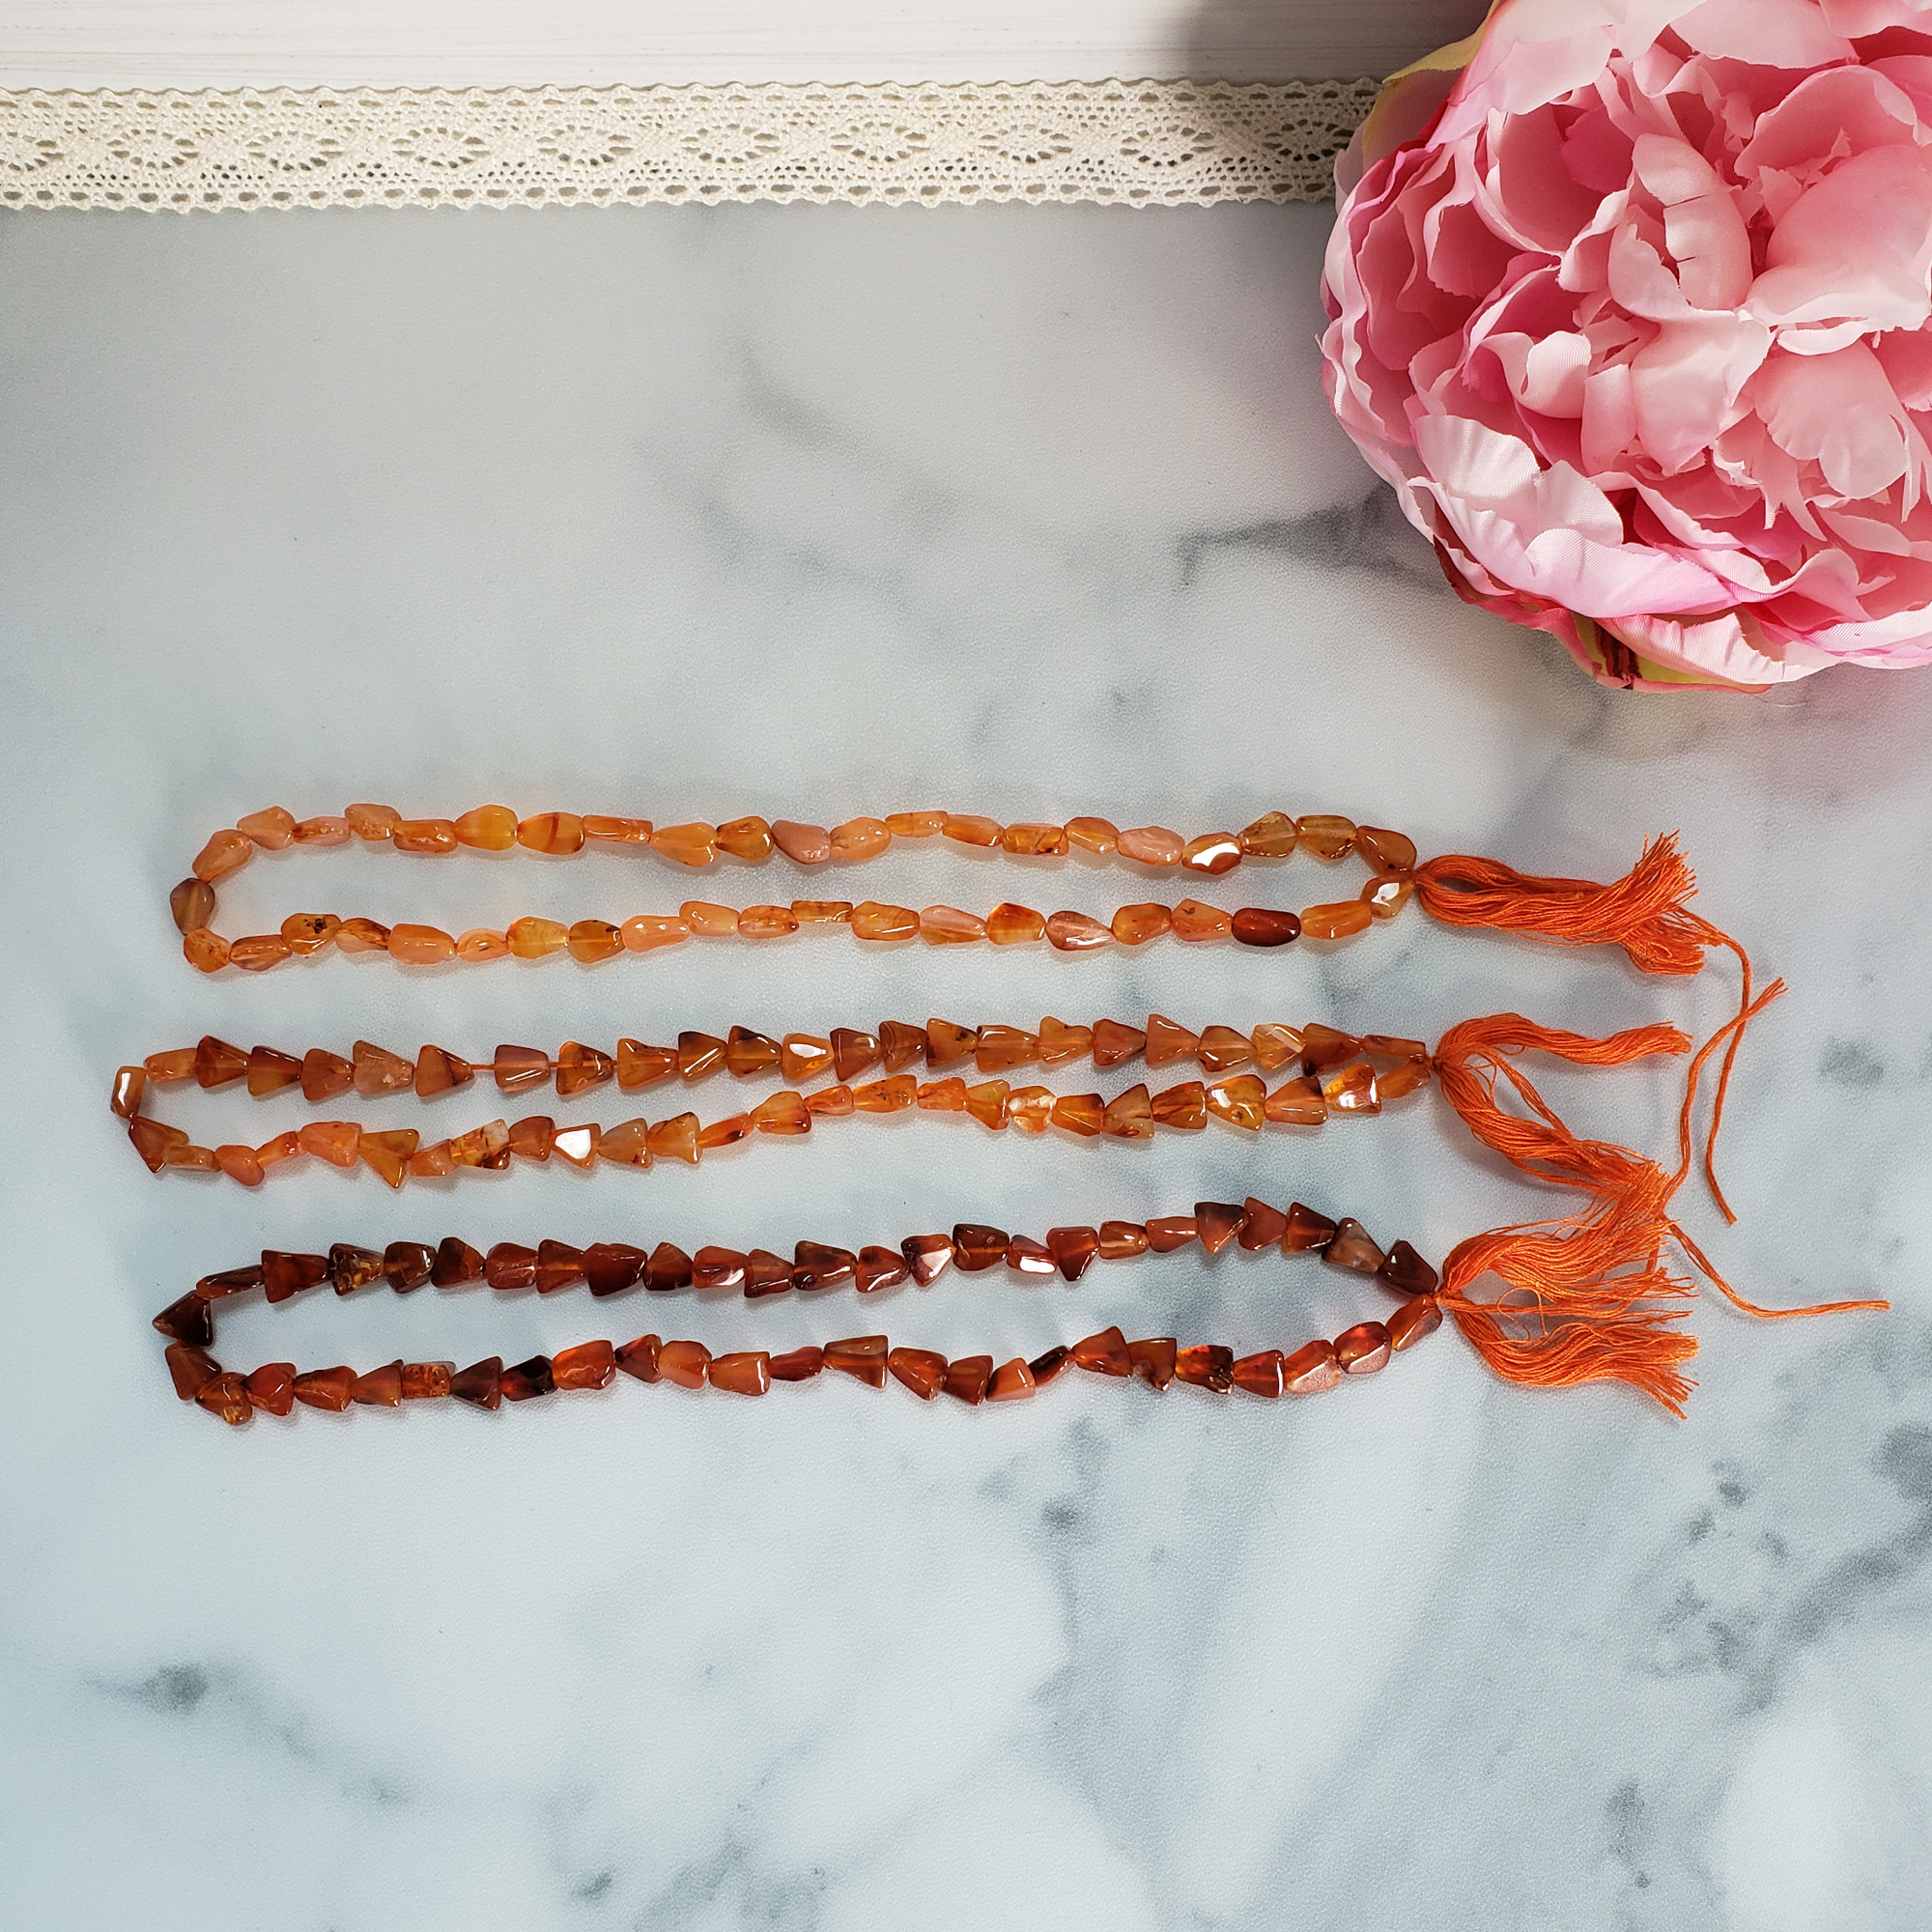 Carnelian Natural Crystal Beads Strand | One Strand of Carnelian Chip Beads - Three Strands of Carnelian Gemstone Beads to Show Color Variance